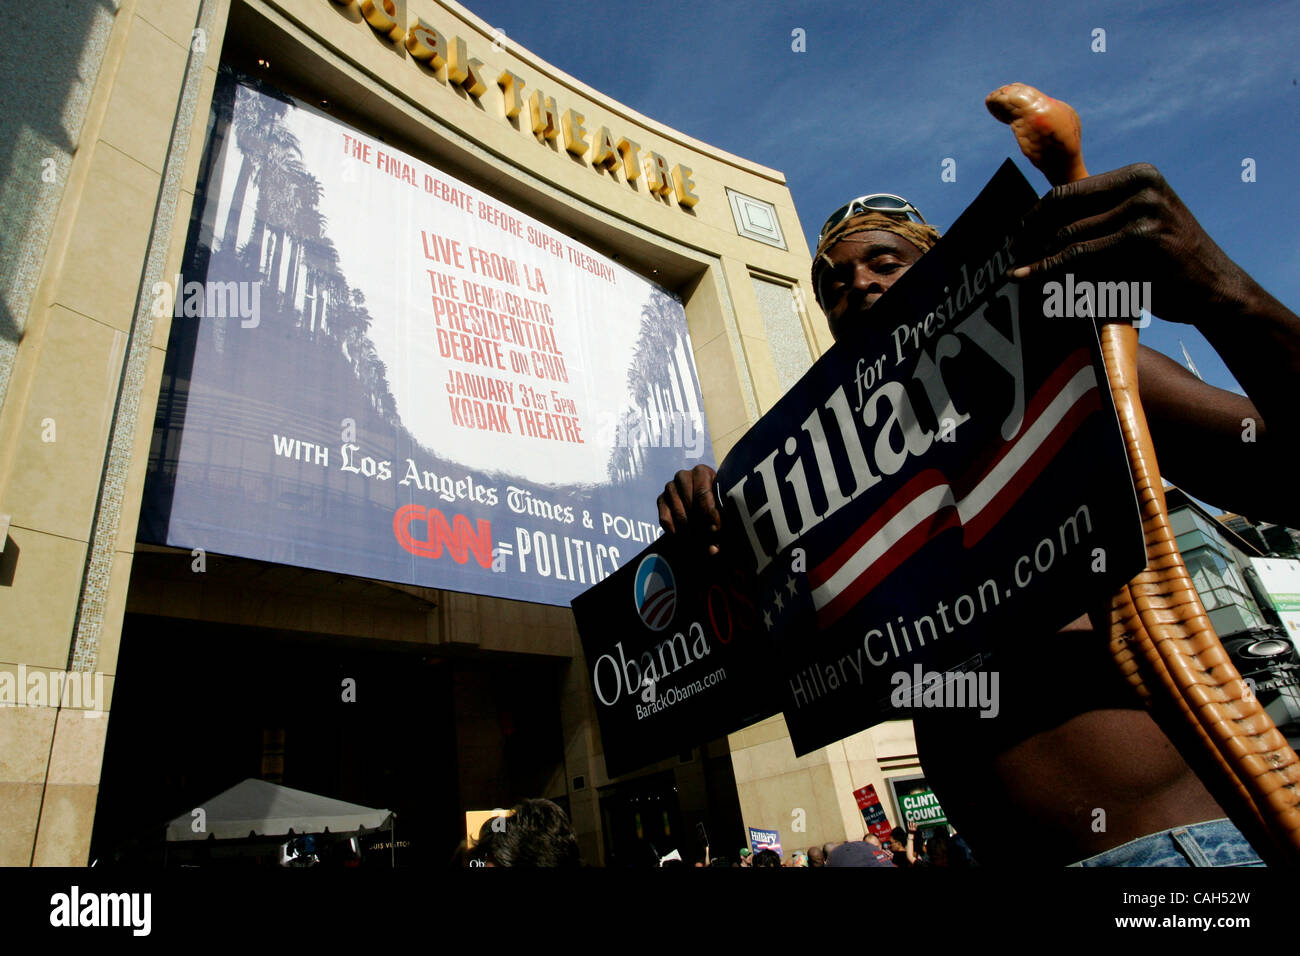 Jan 31, 2008 - Los Angeles, CA, USA -  William Lee Turner , street performer with fake cobras ,outside at the scene outside the Kodak Theater where Obama and Clinton supporters gather to rally prior to the Obama Clinton Democratic debate taking place later this evening. (Credit Image: © Jonathan Alc Stock Photo